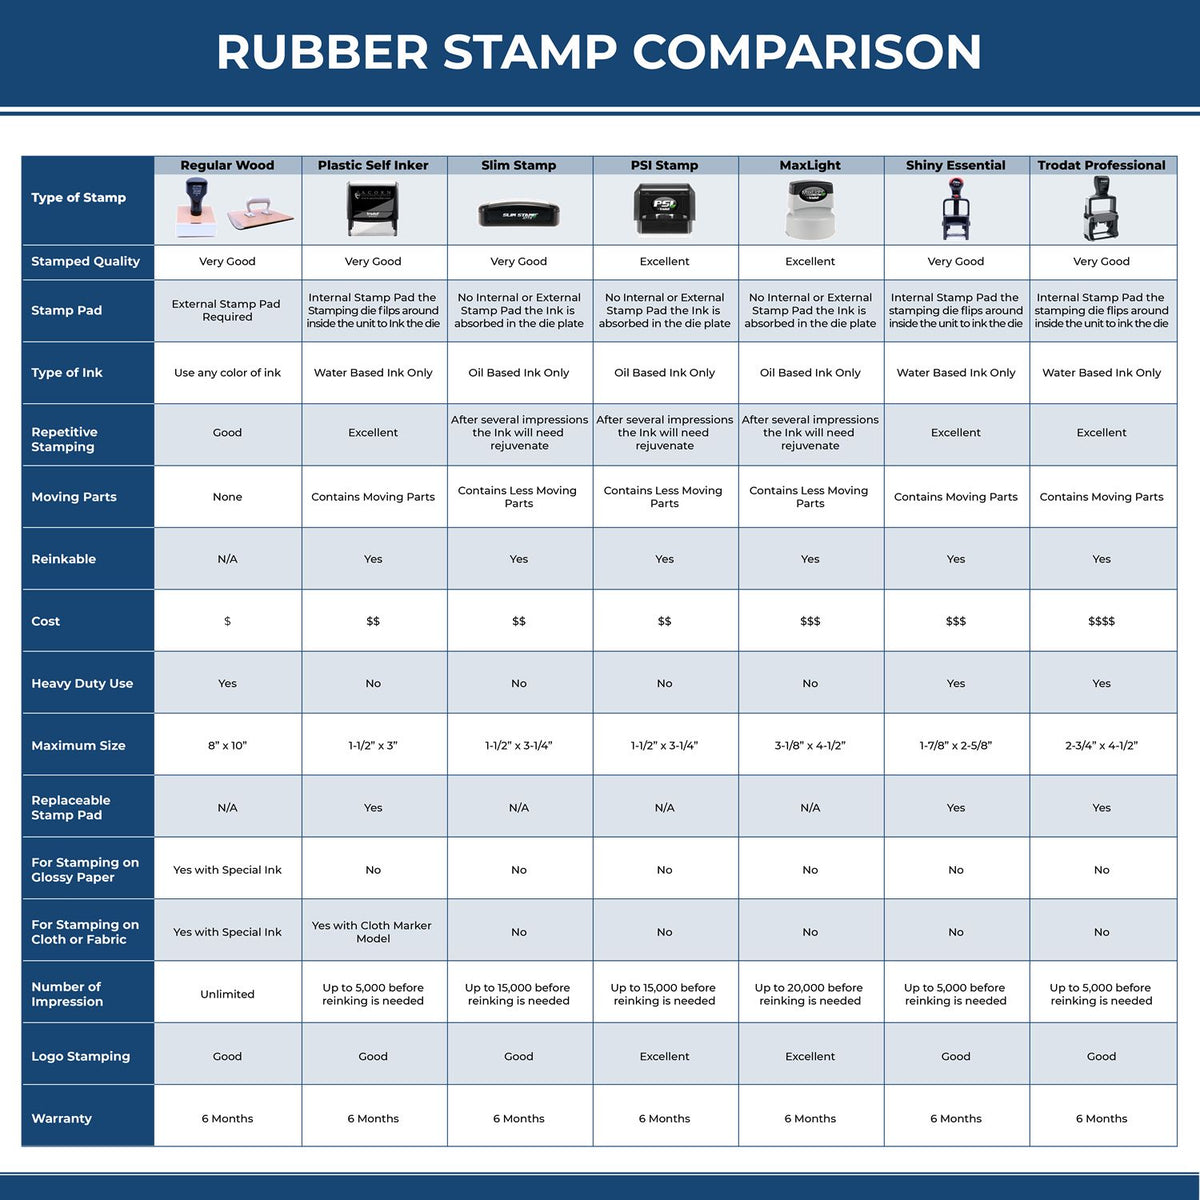 A comparison chart for the different types of mount models available for the Premium MaxLight Pre-Inked Louisiana Engineering Stamp.